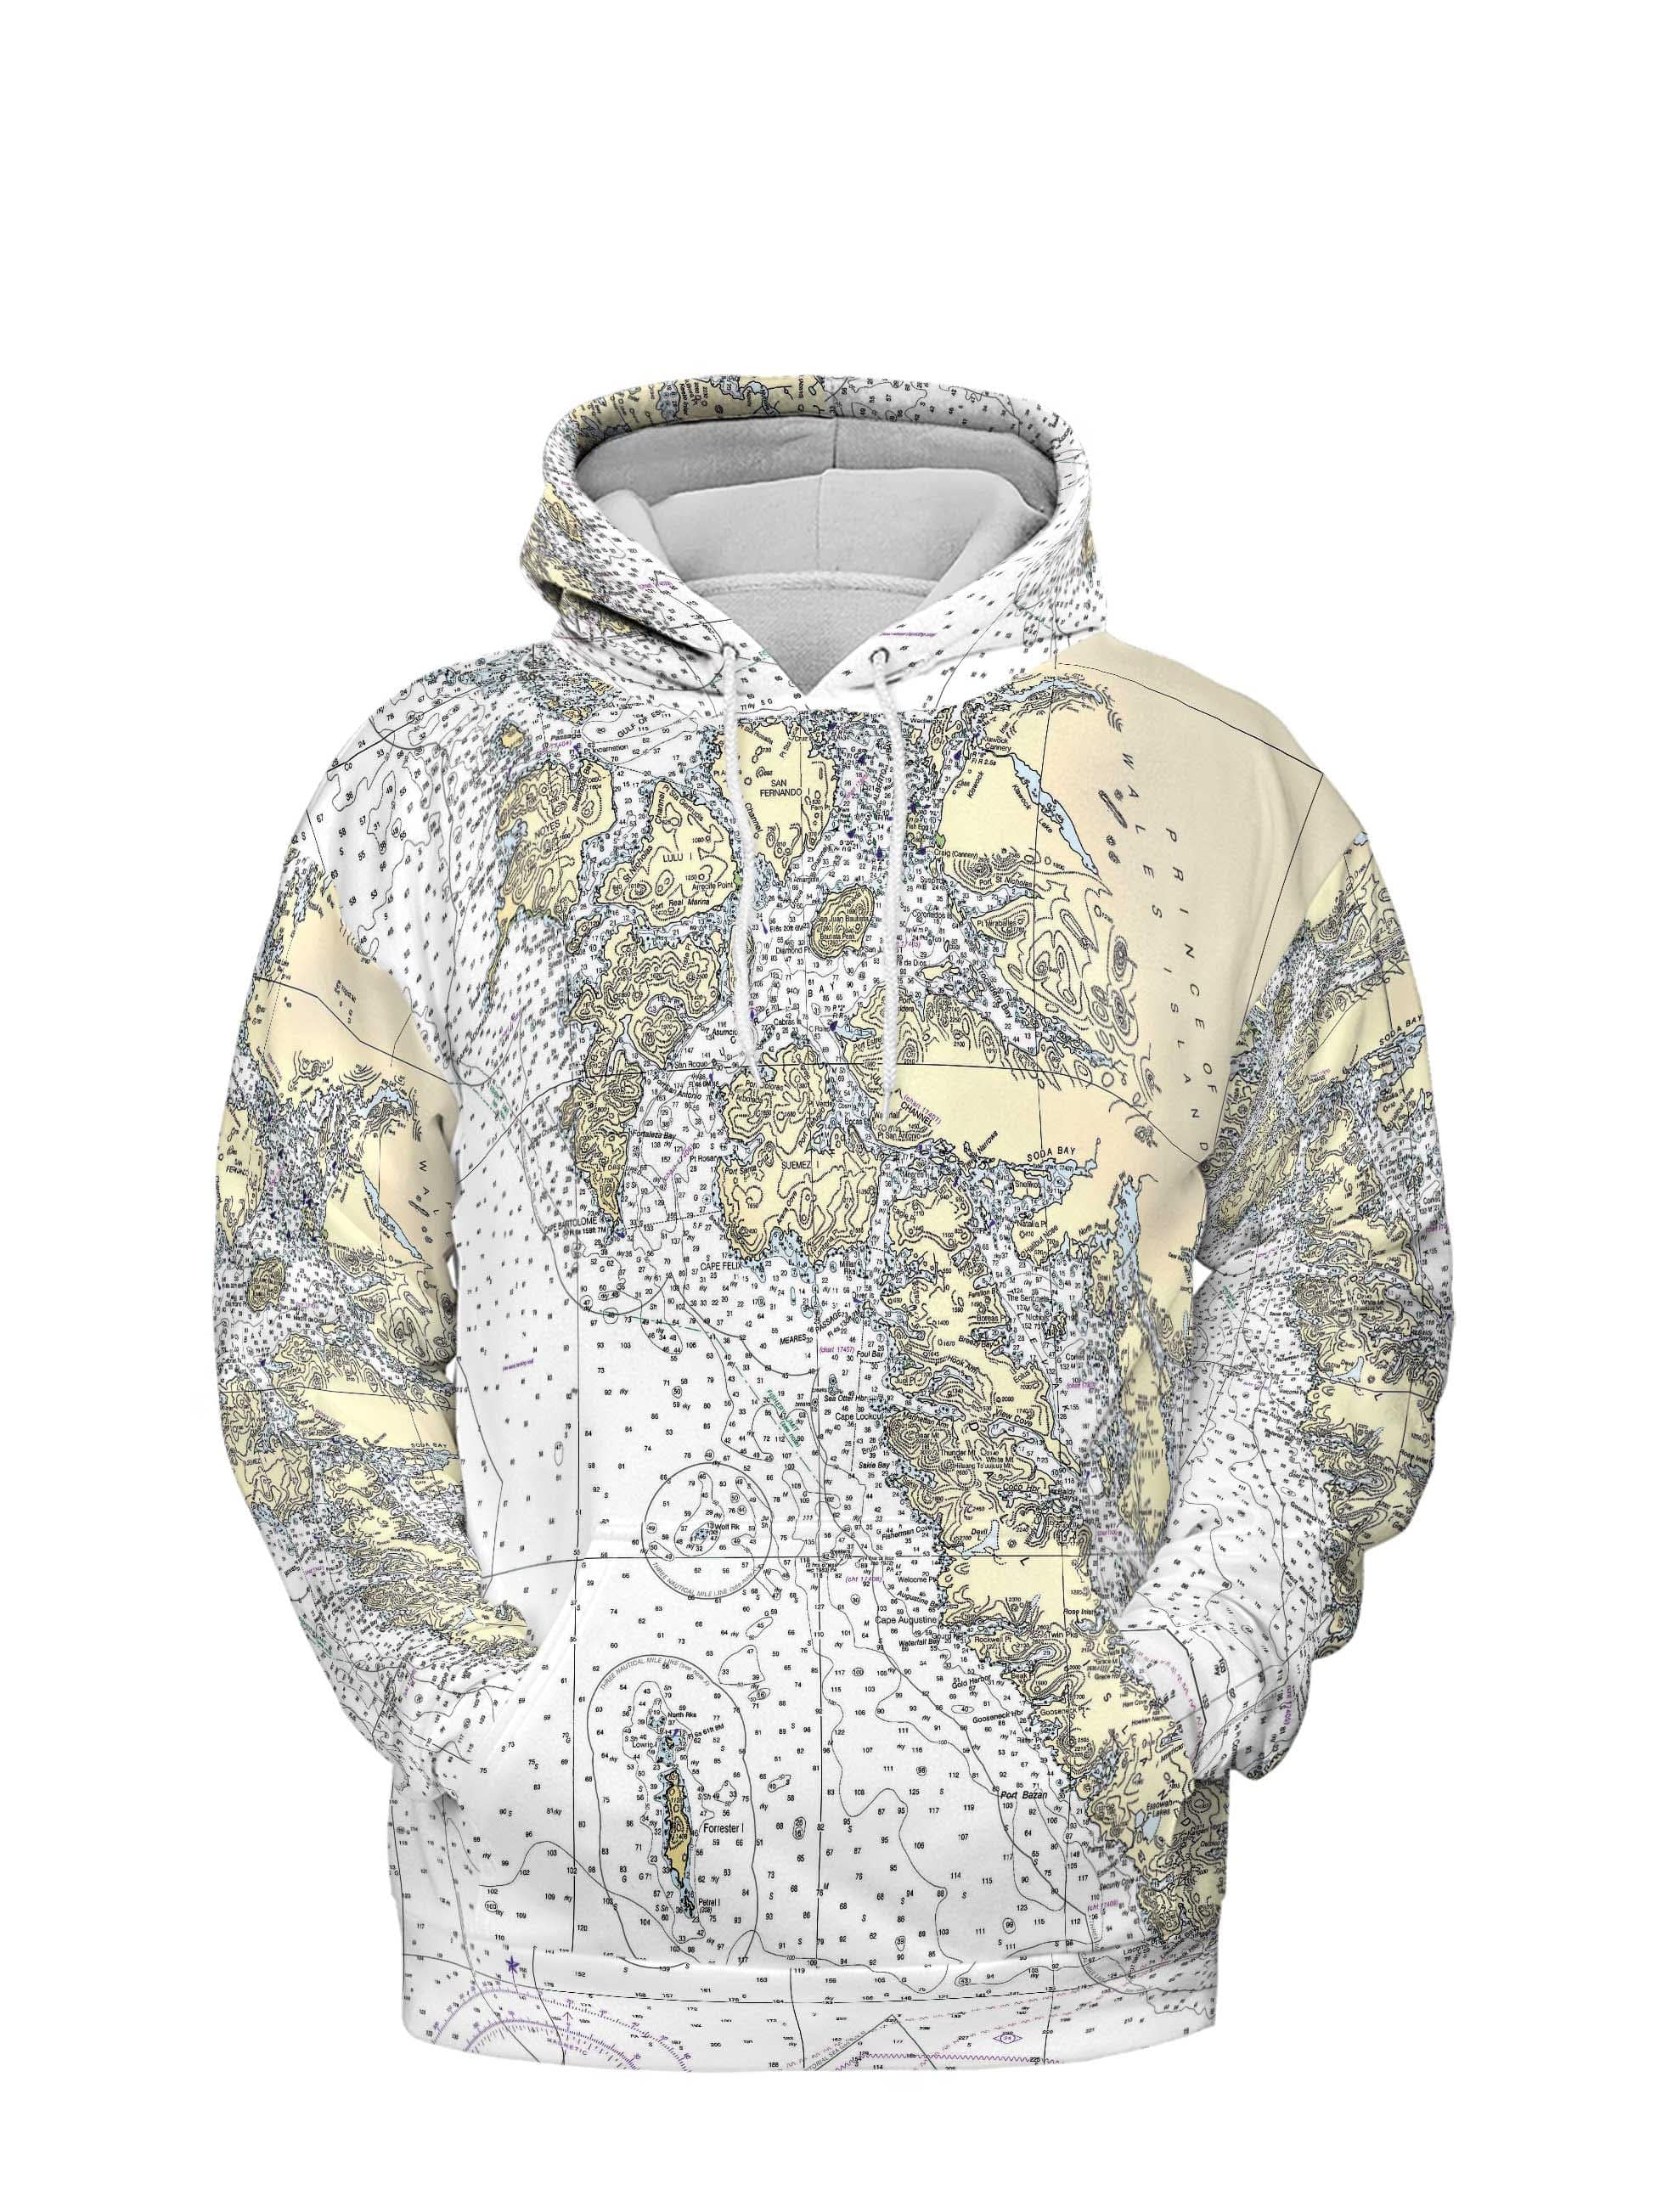 The Gulf of Esquibel to Dixon Entrance Lightweight Hoodie